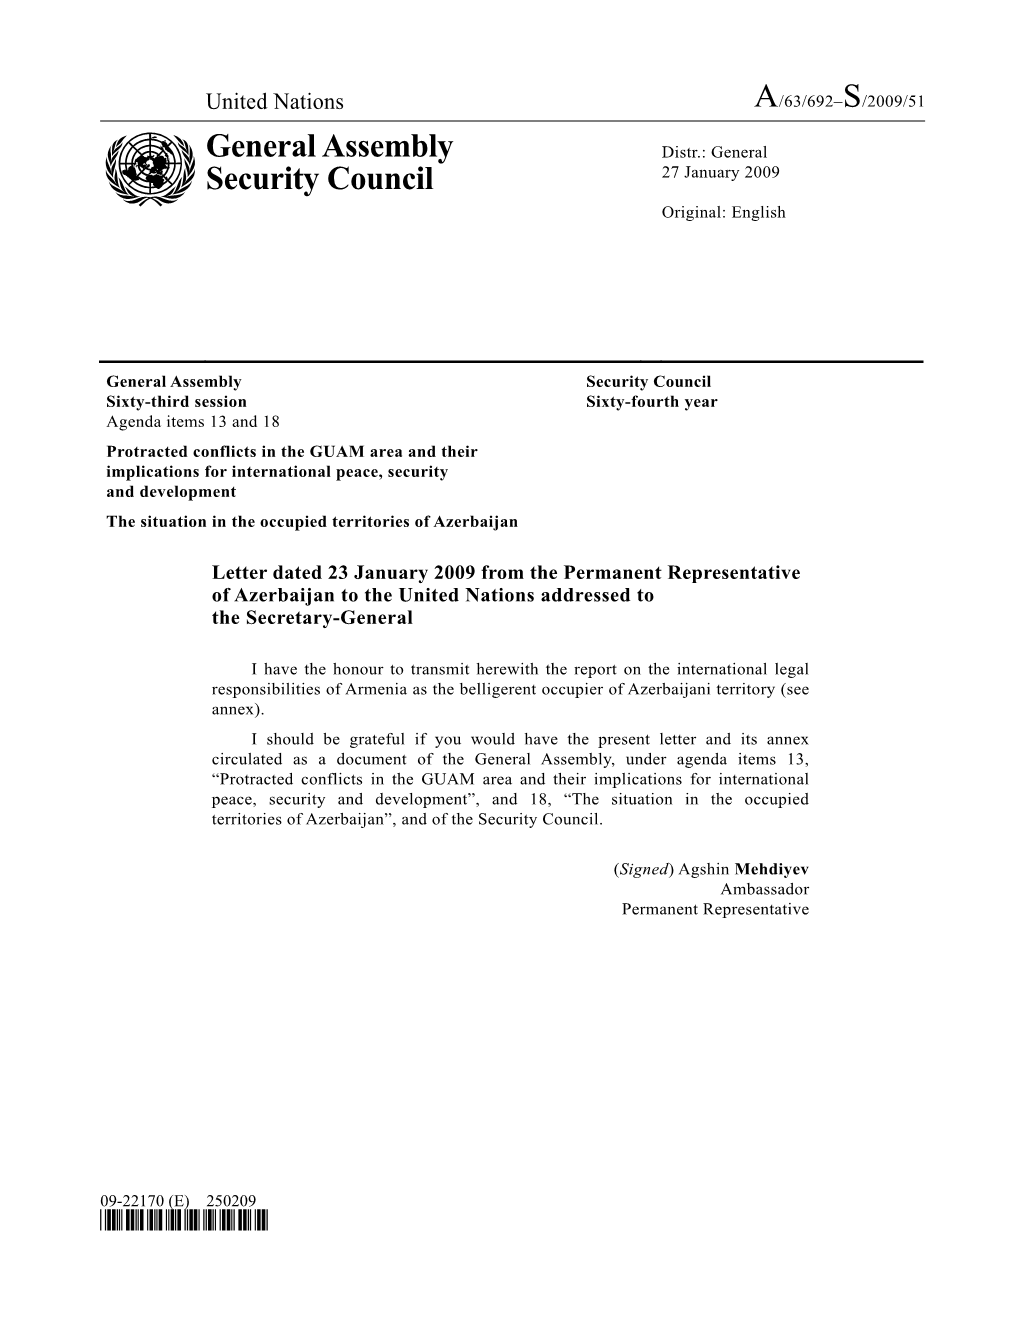 A/63/692–S/2009/51 General Assembly Security Council